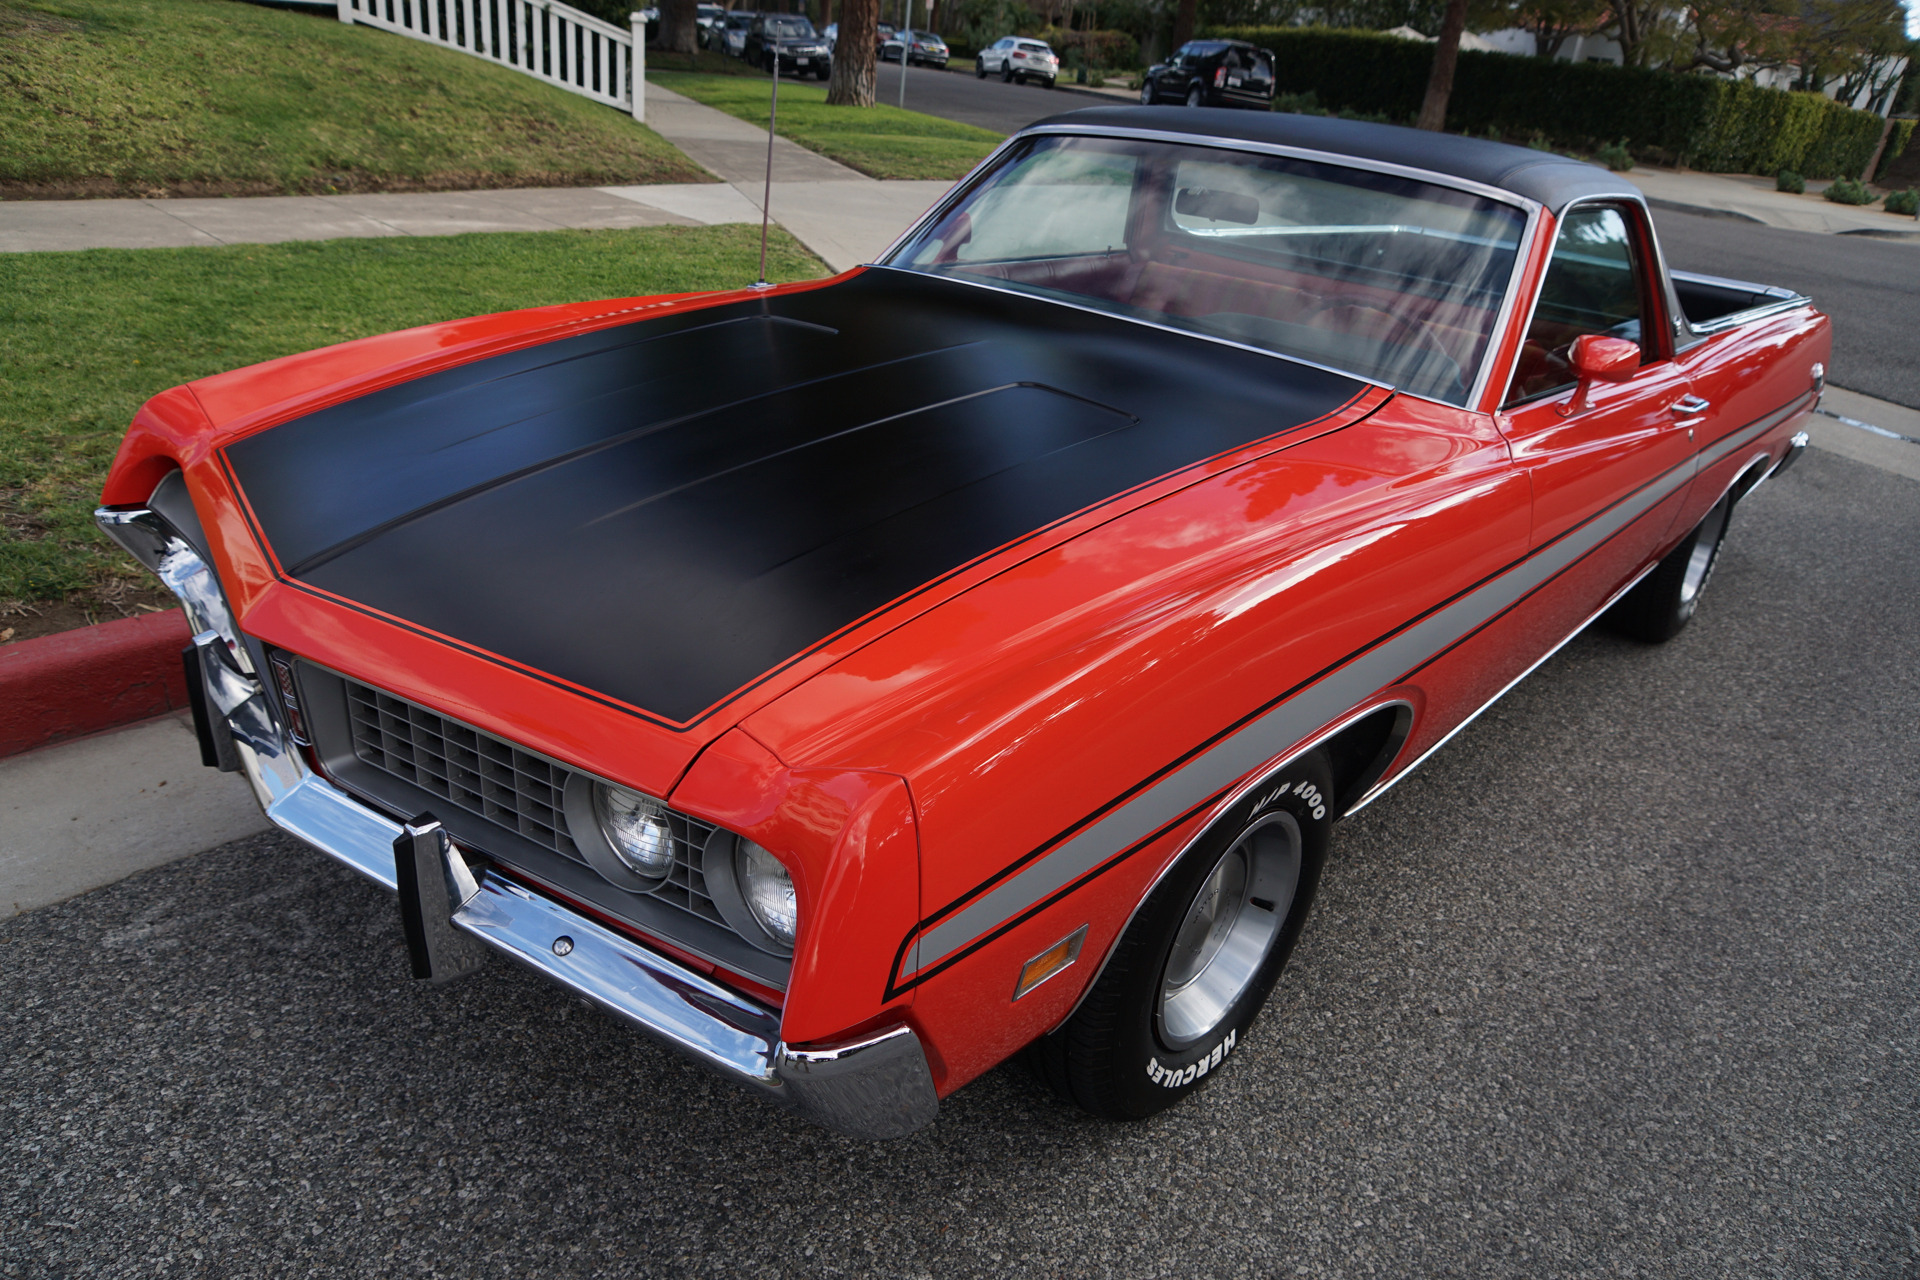 Used 1971 Ford Ranchero 500 Pick Up  | Torrance, CA